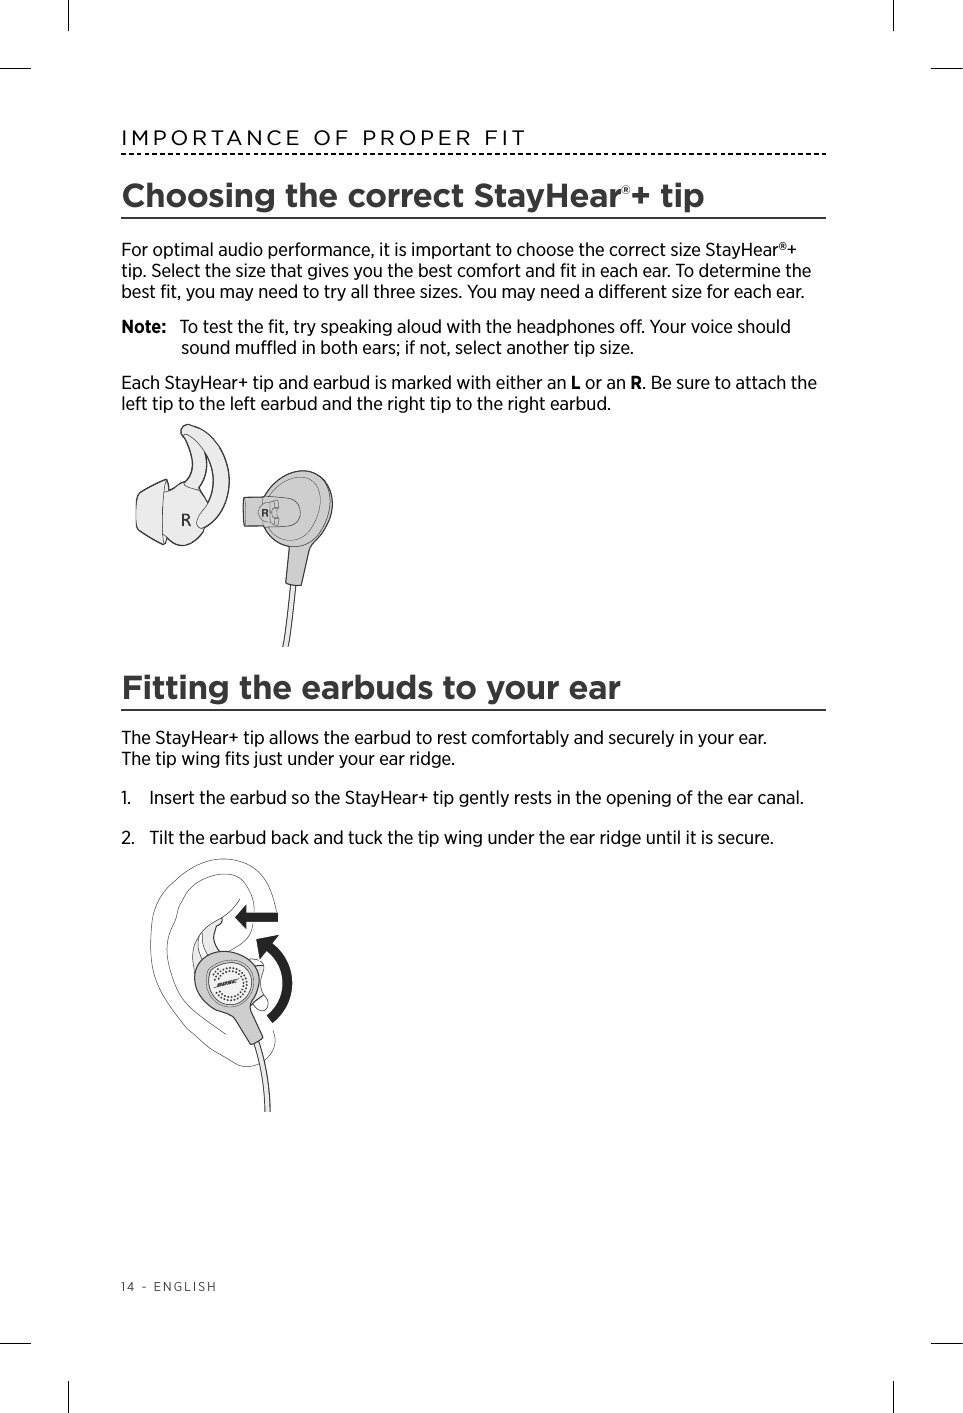 14 - ENGLISHIMPORTANCE OF PROPER FITChoosing the correct StayHear®+ tipFor optimal audio performance, it is important to choose the correct size StayHear+ tip. Select the size that gives you the best comfort and ﬁt in each ear. To determine the best ﬁt, you may need to try all three sizes. You may need a  dierent size for each ear.Note:  To test the ﬁt, try speaking aloud with the headphones o. Your voice should sound mued in both ears; if not, select another ti p size.Each StayHear+ tip and earbud is marked with either an L or an R. Be sure to attach the left tip to the left earbud and the right tip to the right earbud. Fitting the earbuds to your earThe StayHear+ tip allows the earbud to rest comfortably and securely in your ear.  The tip wing ﬁts just under your ear ridge.1.   Insert the earbud so the StayHear+ tip gently rests in the opening of the ear canal. 2.   Tilt the earbud back and tuck the tip wing under the ear ridge until it is secure.  